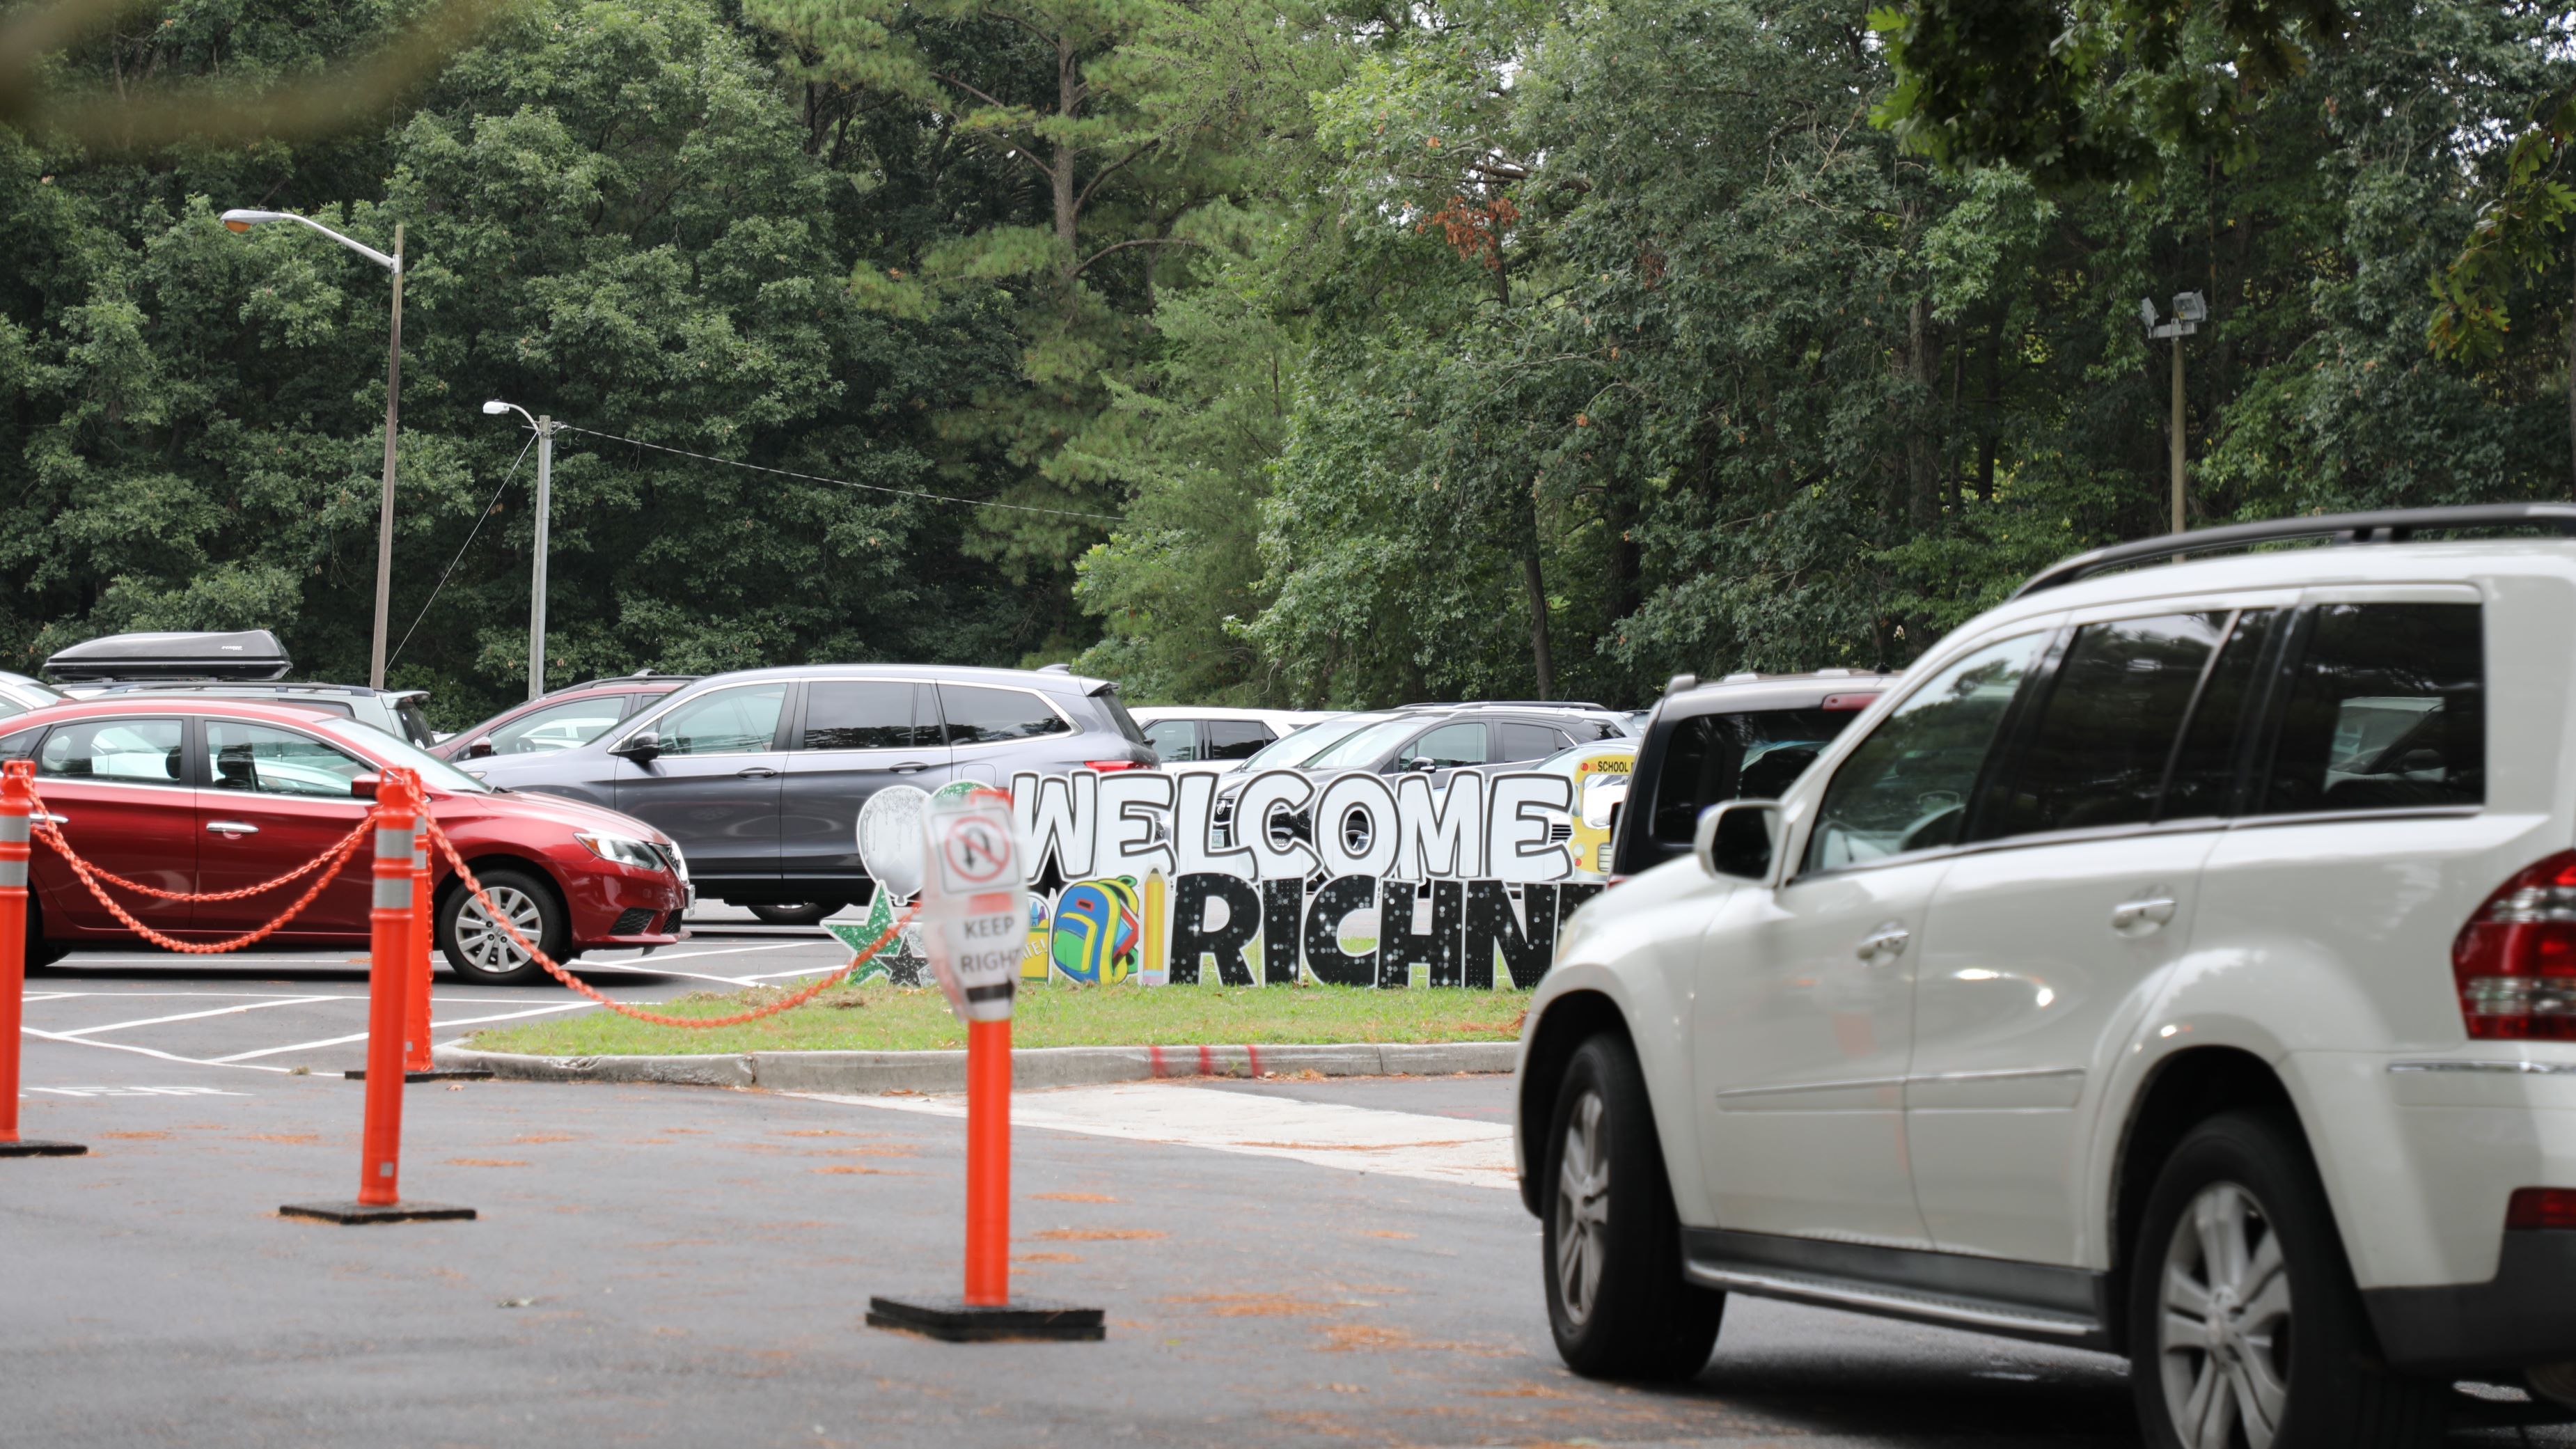 Cars wait in the drop off line at Richenck Elementary in Newport News, where a six-year-old shot his teacher in January. (Photo: Laura Philion)